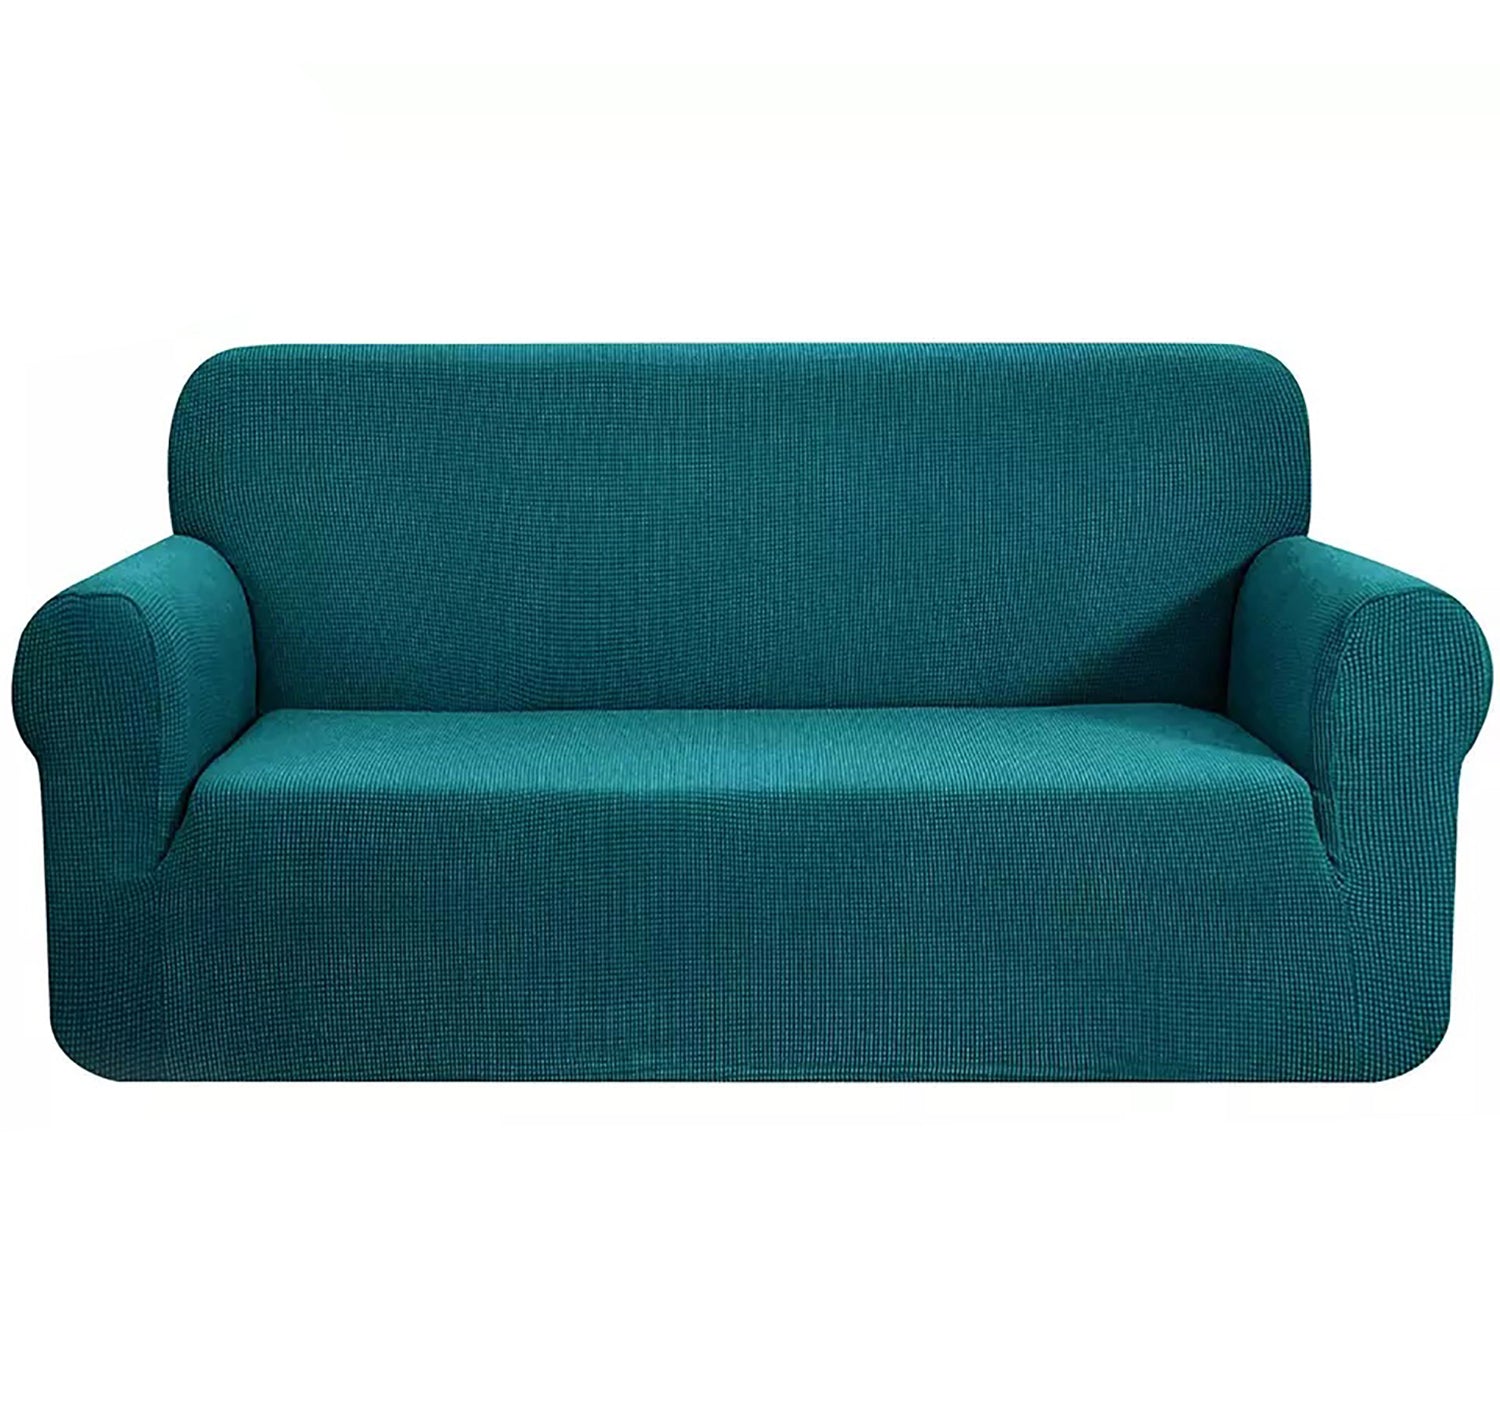 Teal Blue 2-Piece Set Slipcover Sofa & Loveseat Cover Protector 4-Way Stretch Elastic